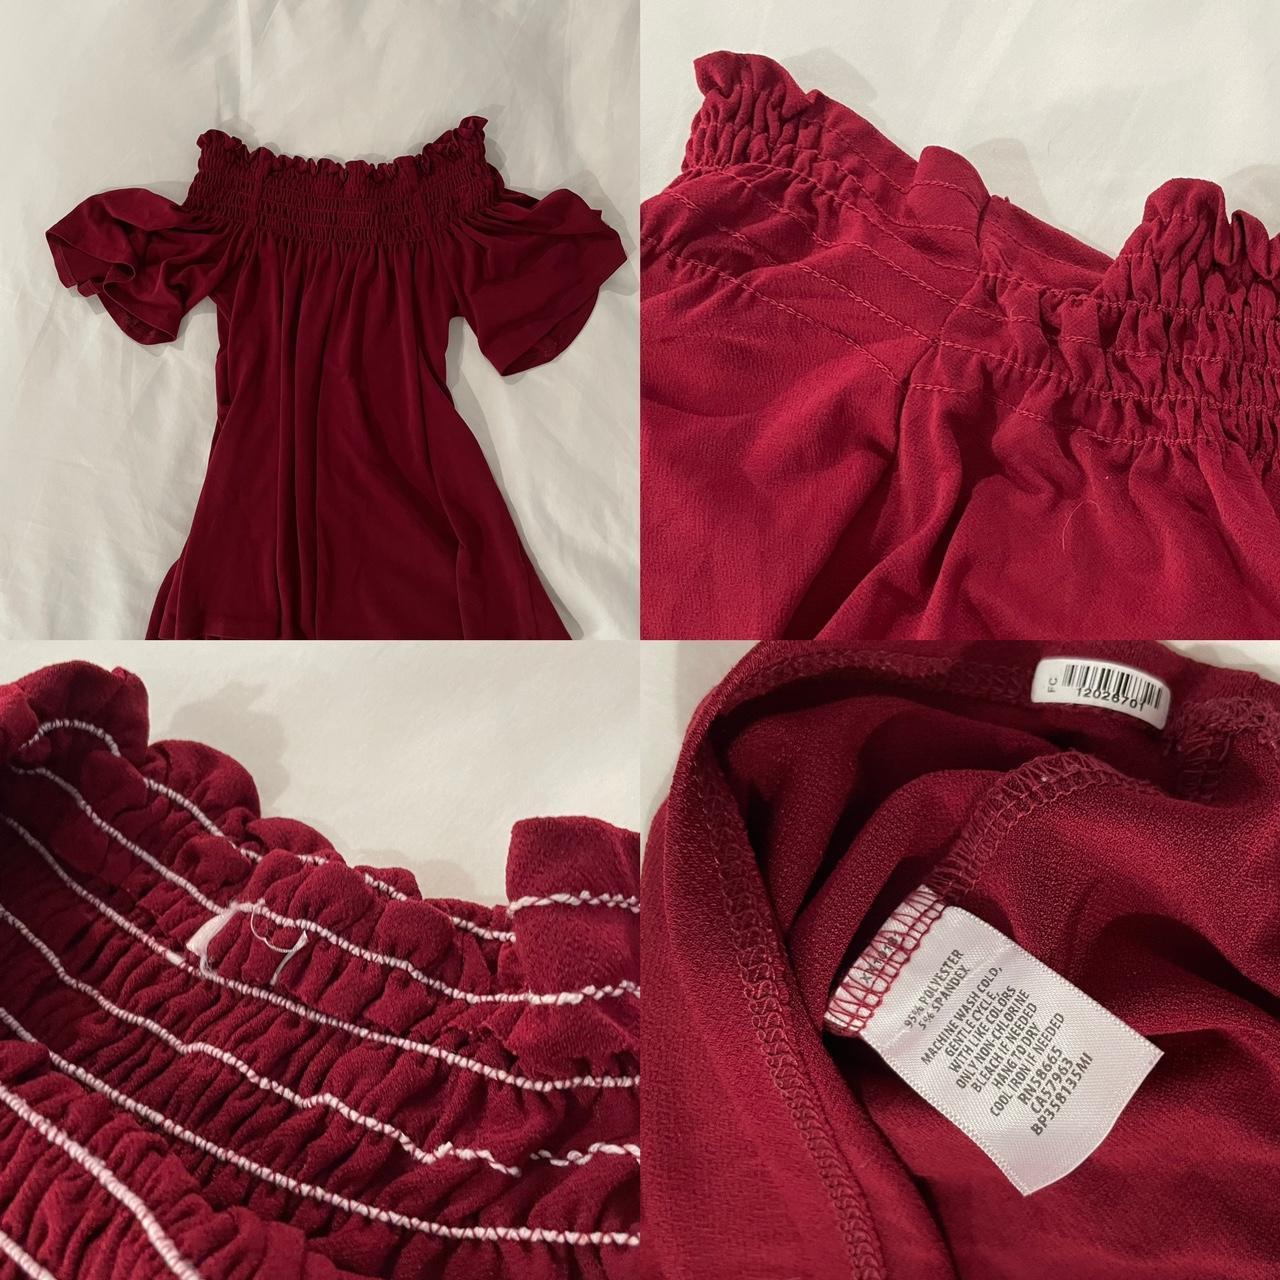 Nordstrom Women's Burgundy and Red Blouse | Depop